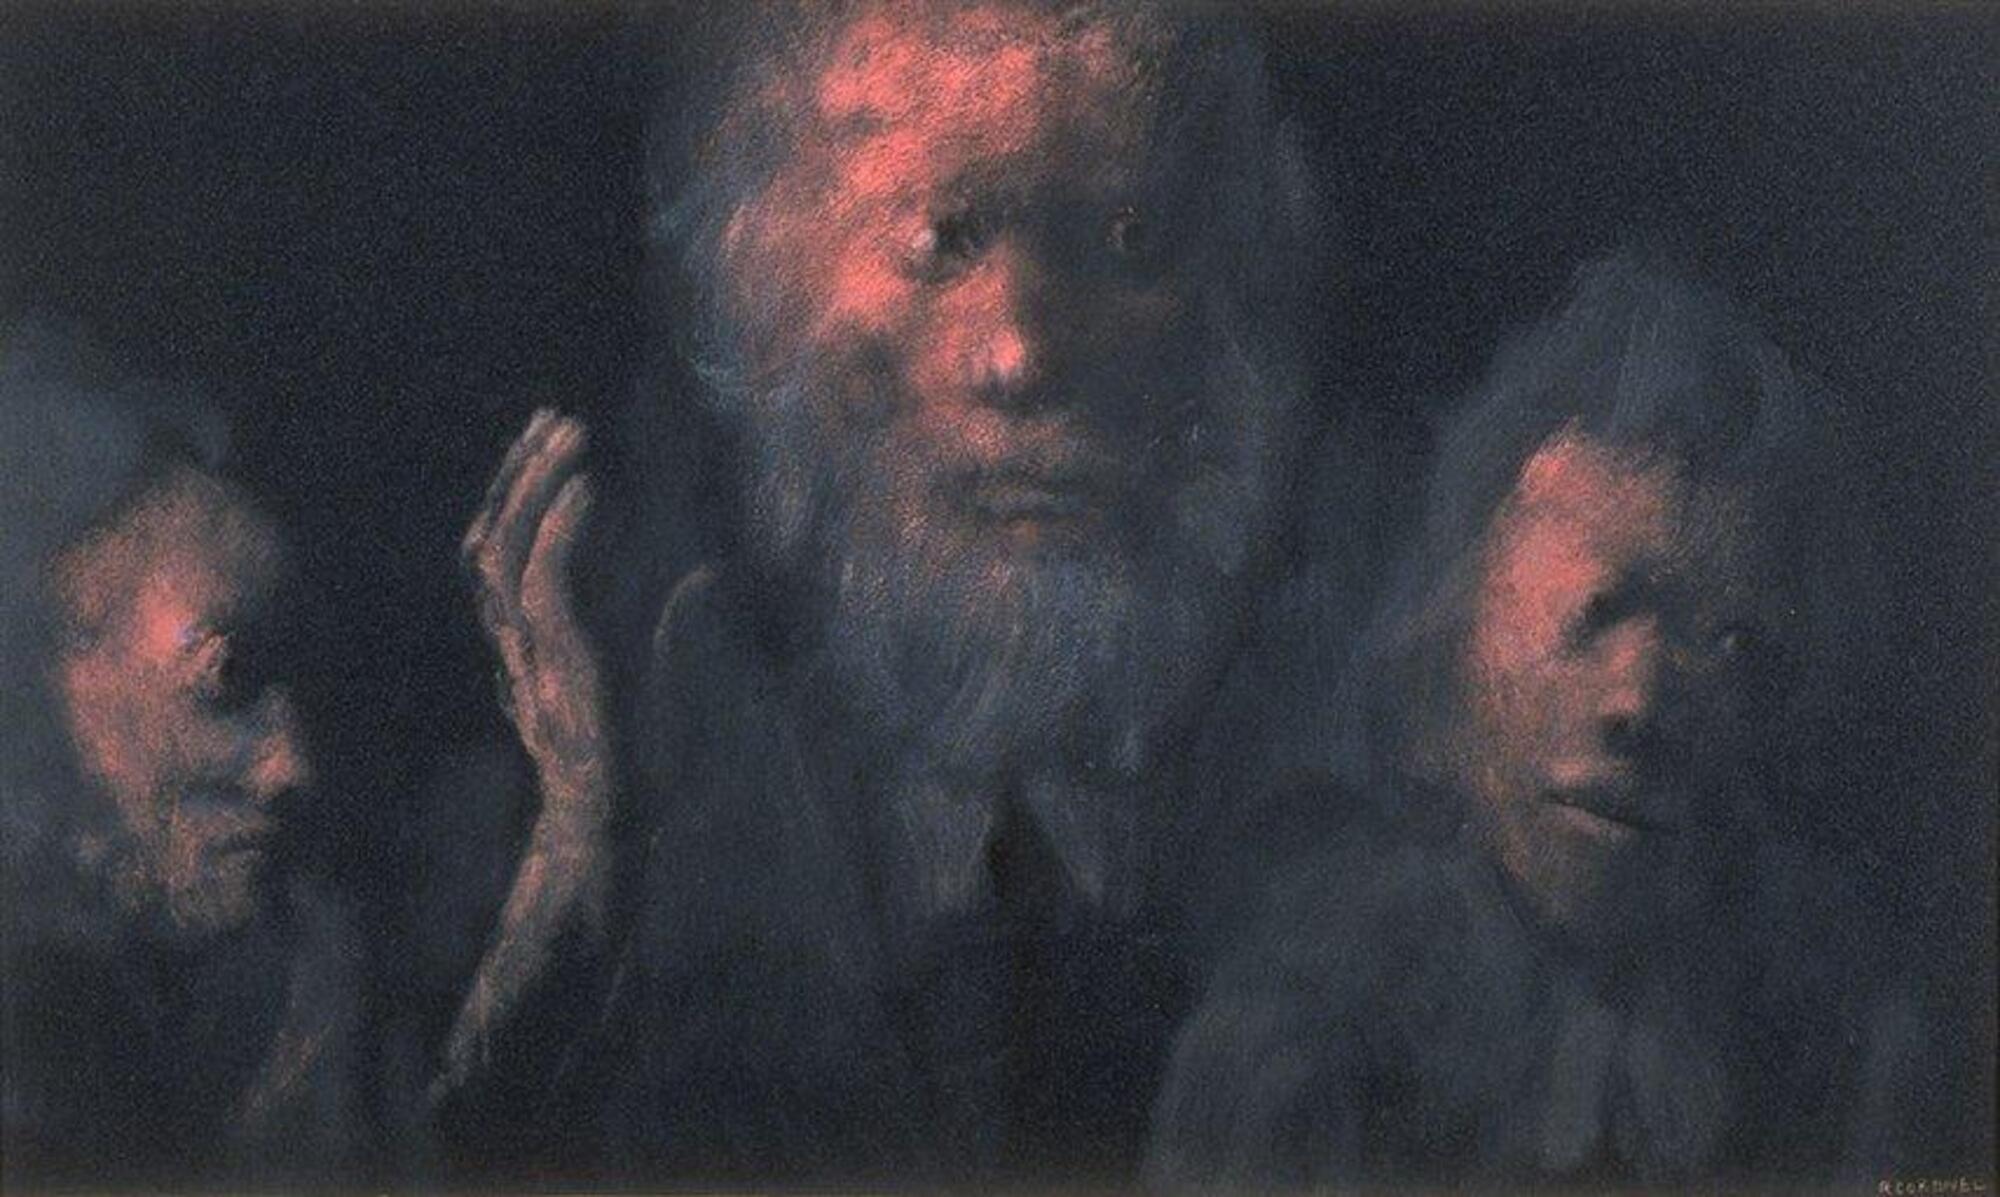 A group portrait of three figures shown from the chest up, against a black background. An older man faces forward, in the center, with gray hair and a gray beard. The person to his right faces and stares intently at him. The person to his left appears younger, has tousled hair and gazes off to the side.